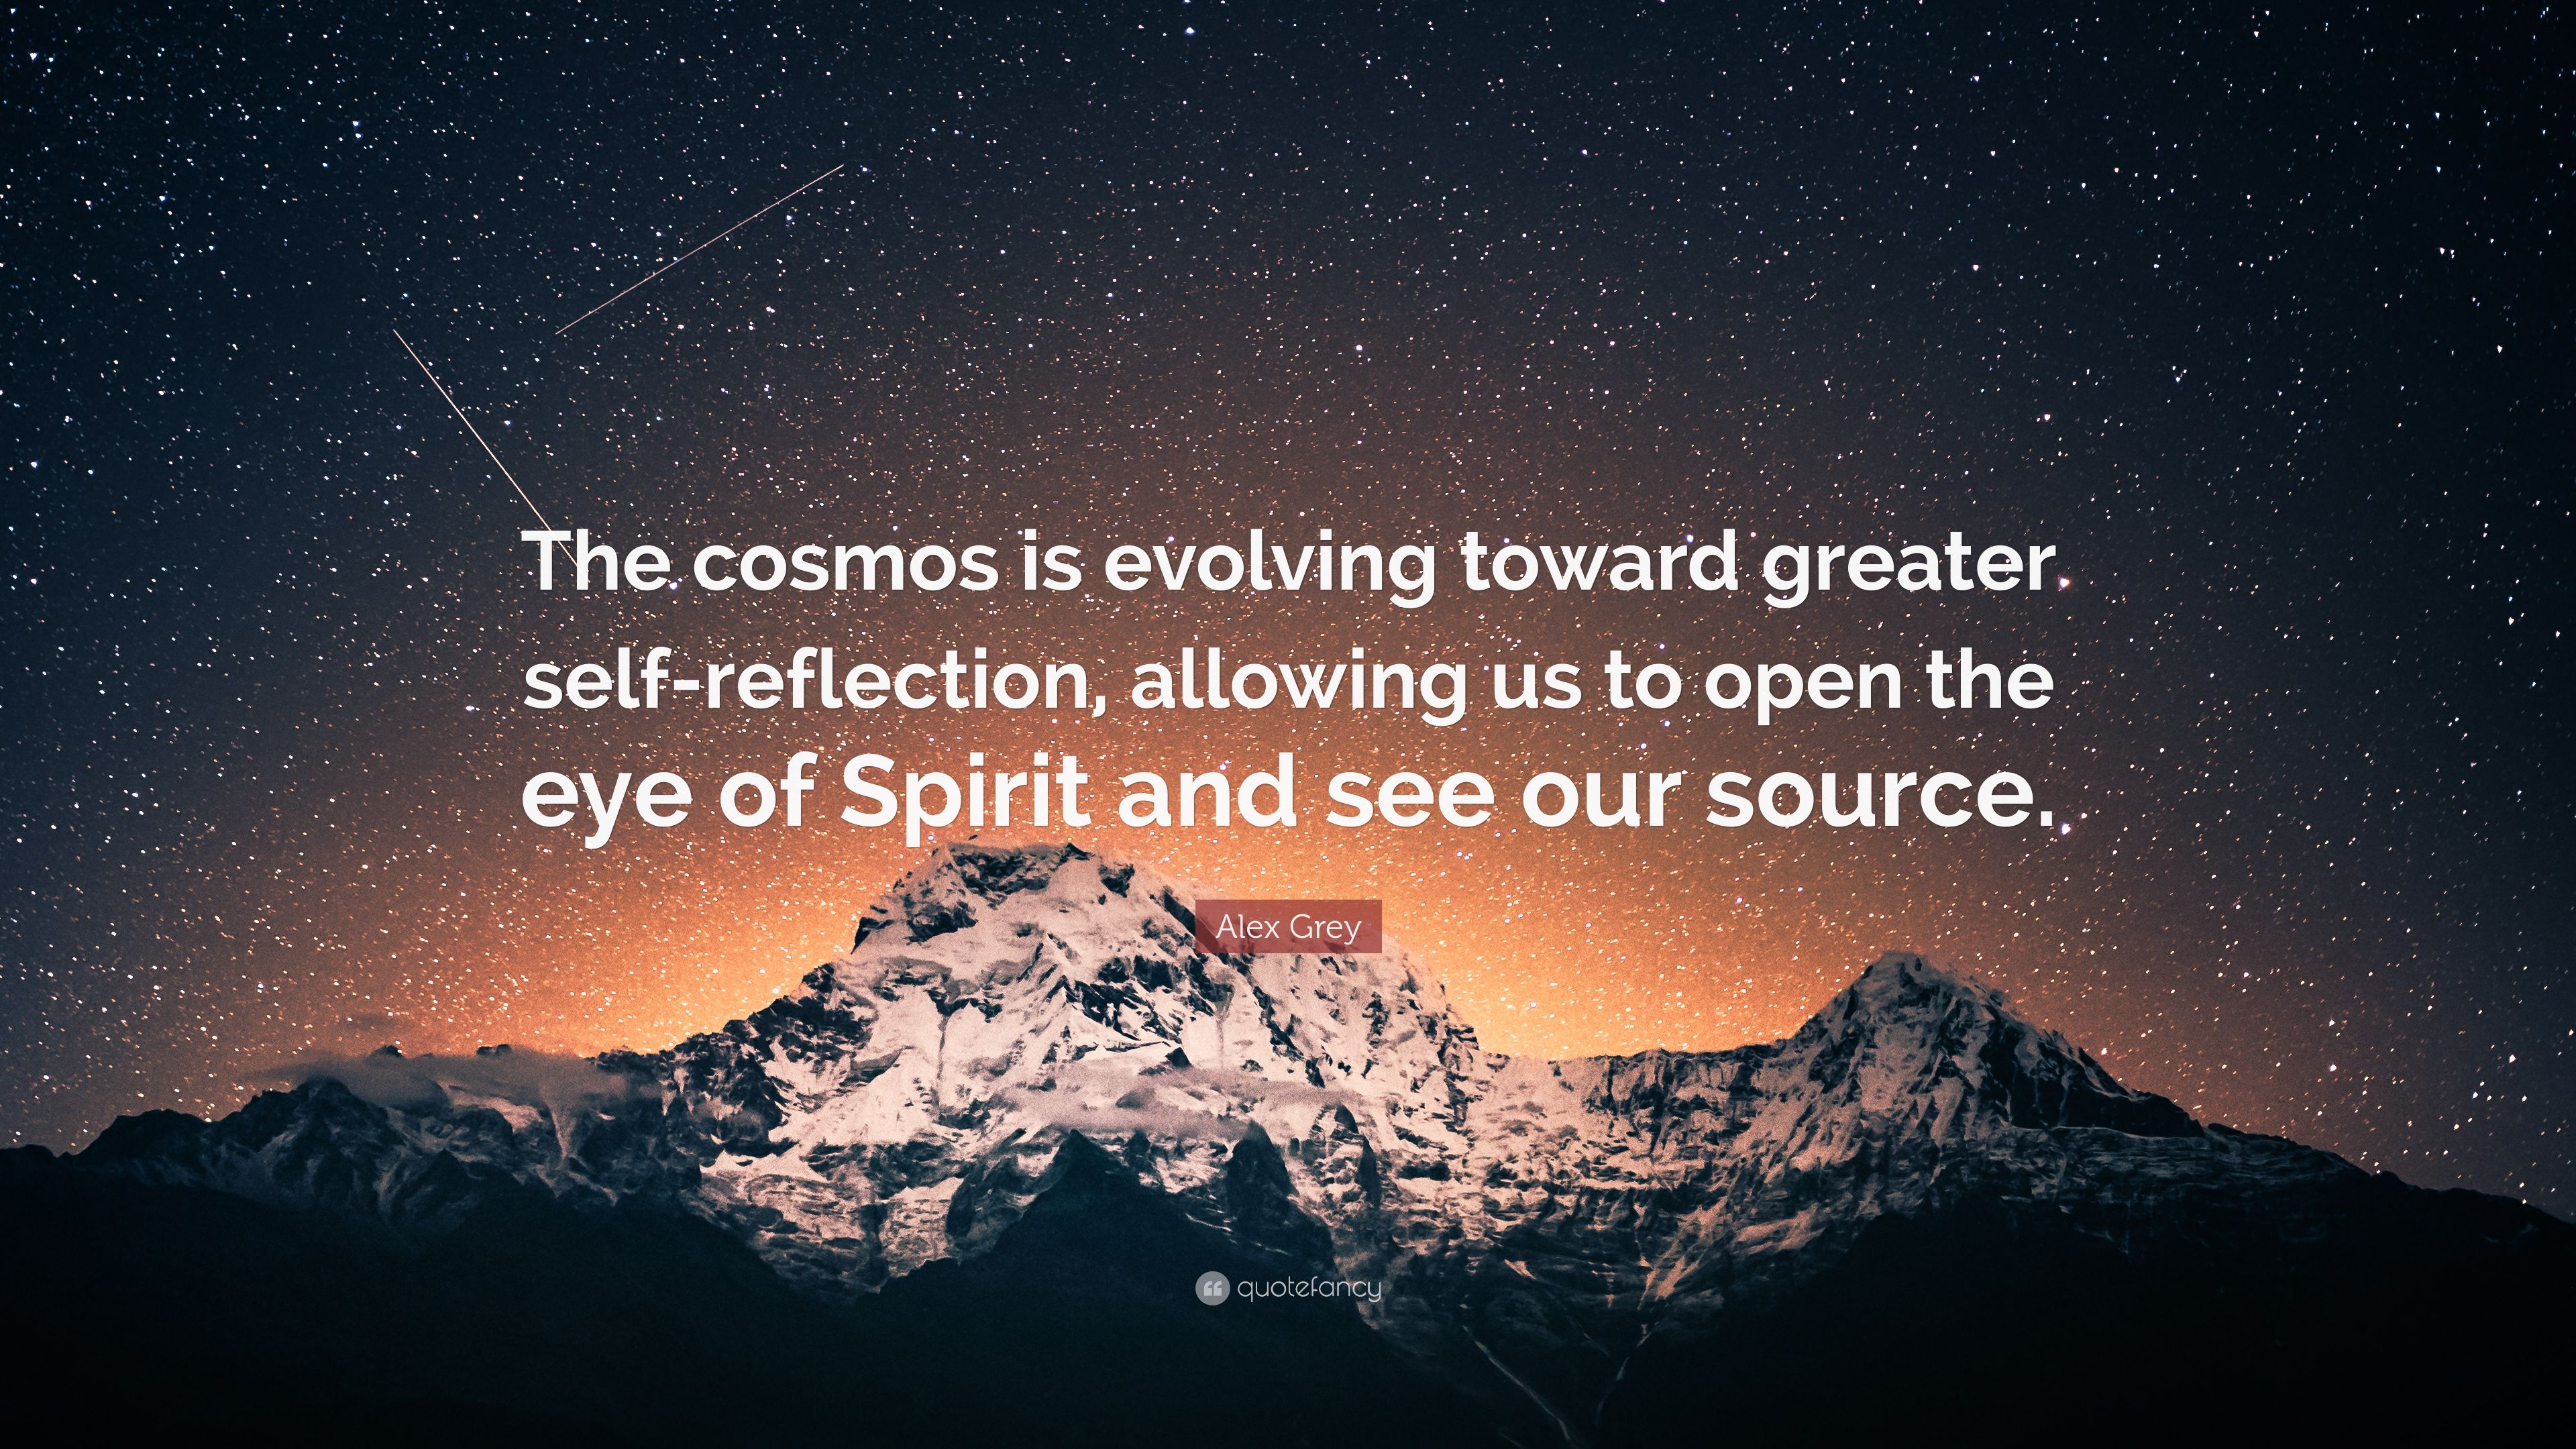 Alex Grey Quote: “The cosmos is evolving toward greater self